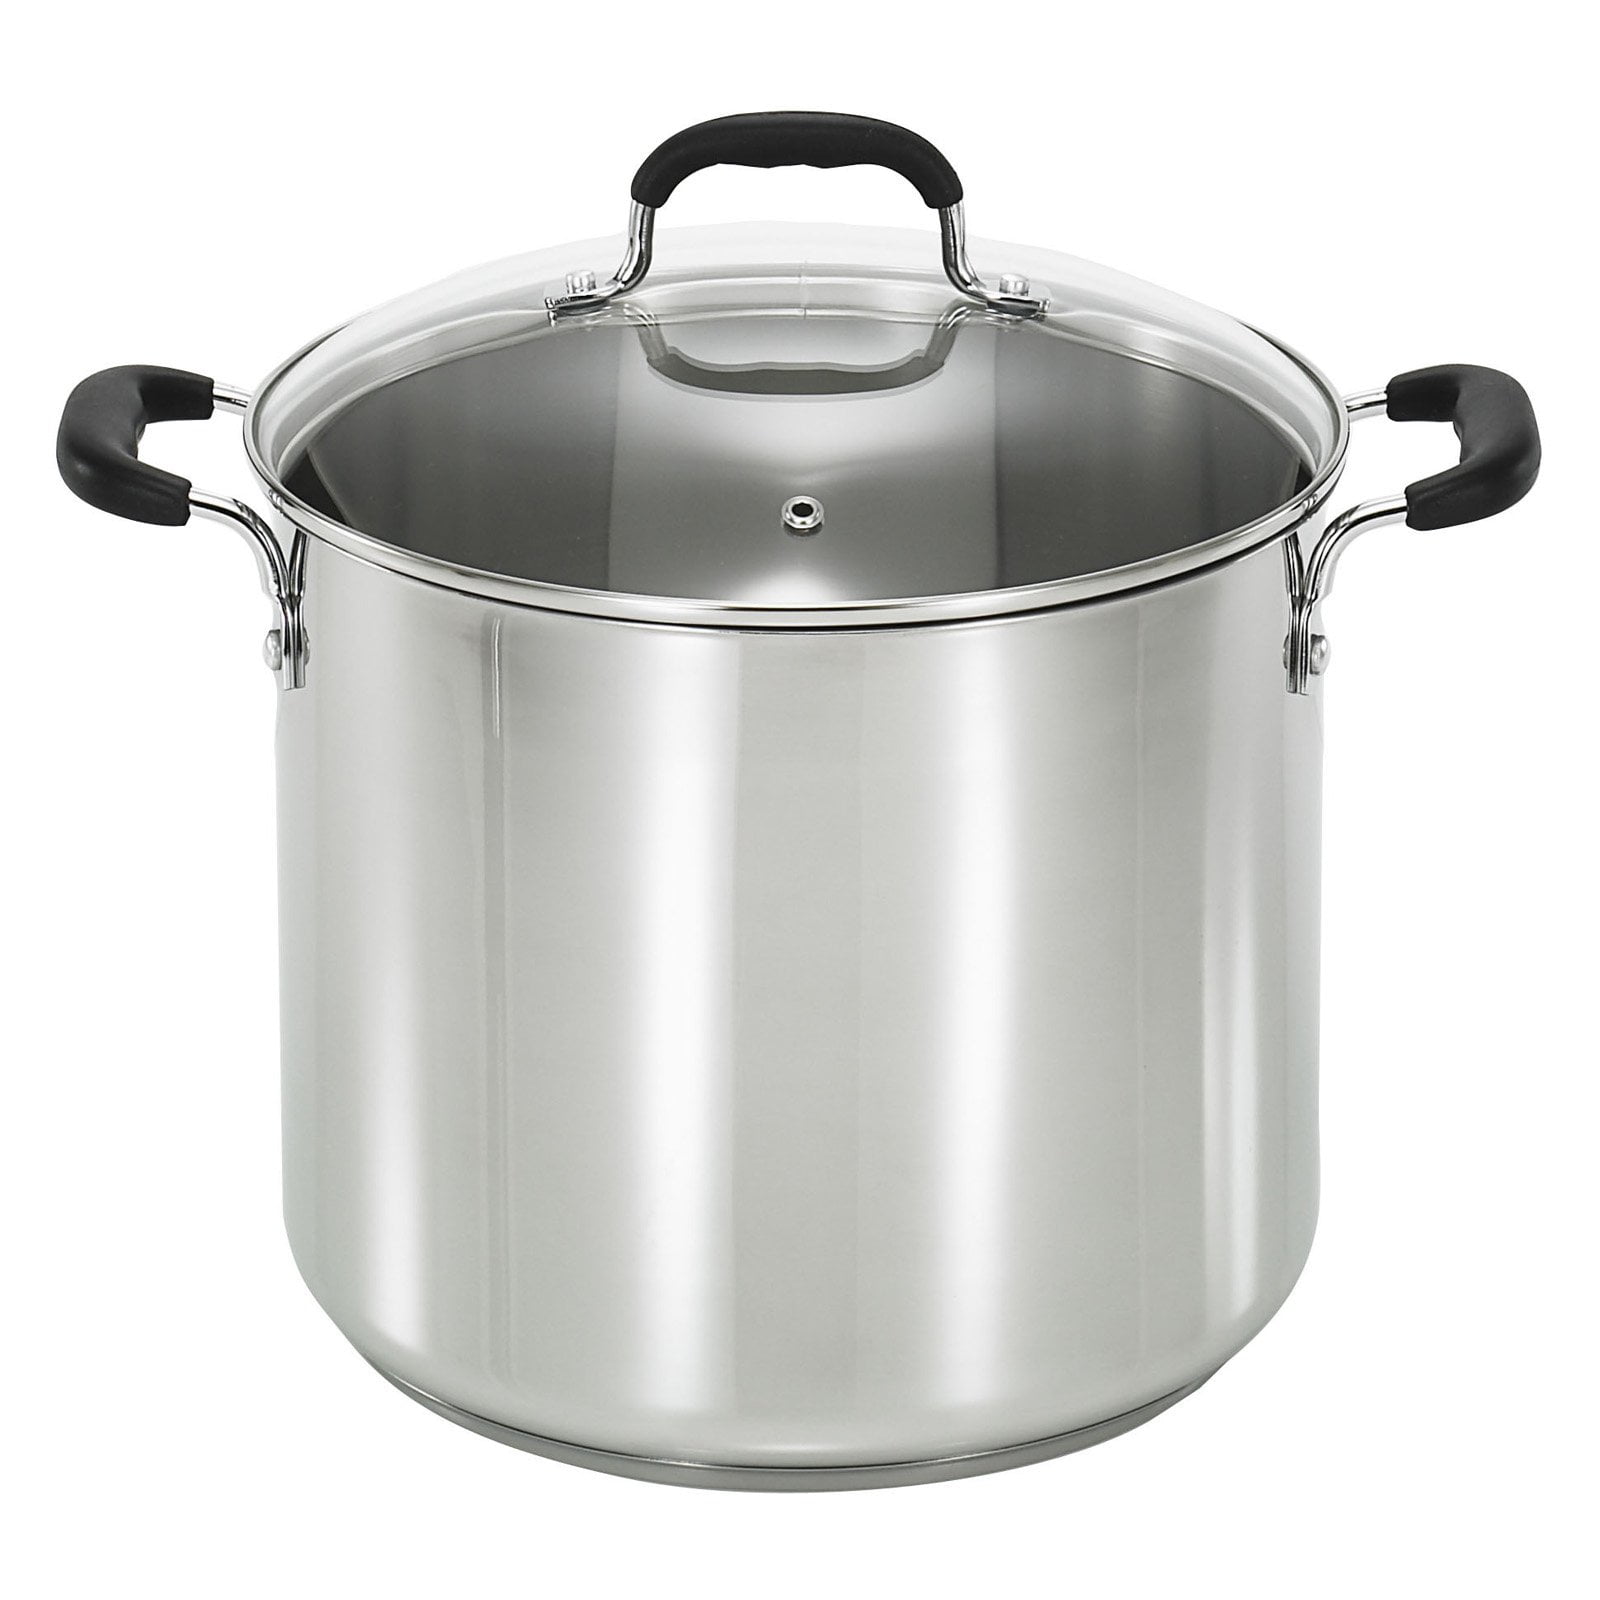 Covered Stock Pot Stainless Steel Home Kitchen Soup Cookware Glass Lid 12 Quart